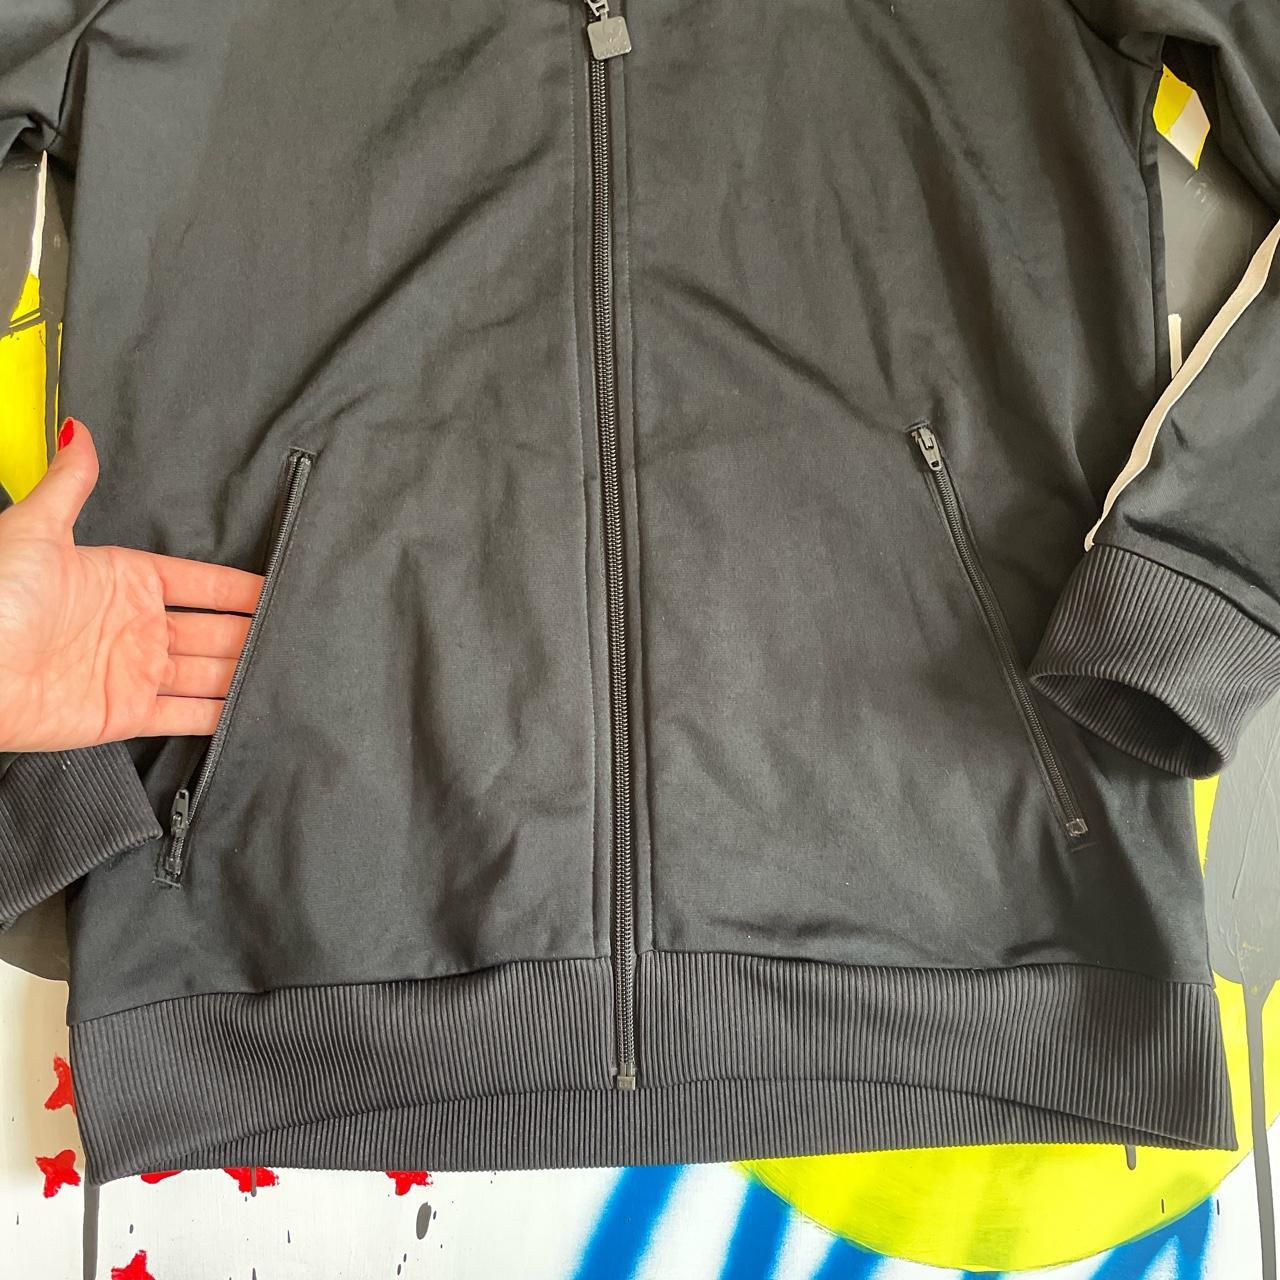 Classic Adidas 3 Stripe, Full Zip Track Jacket with... - Depop